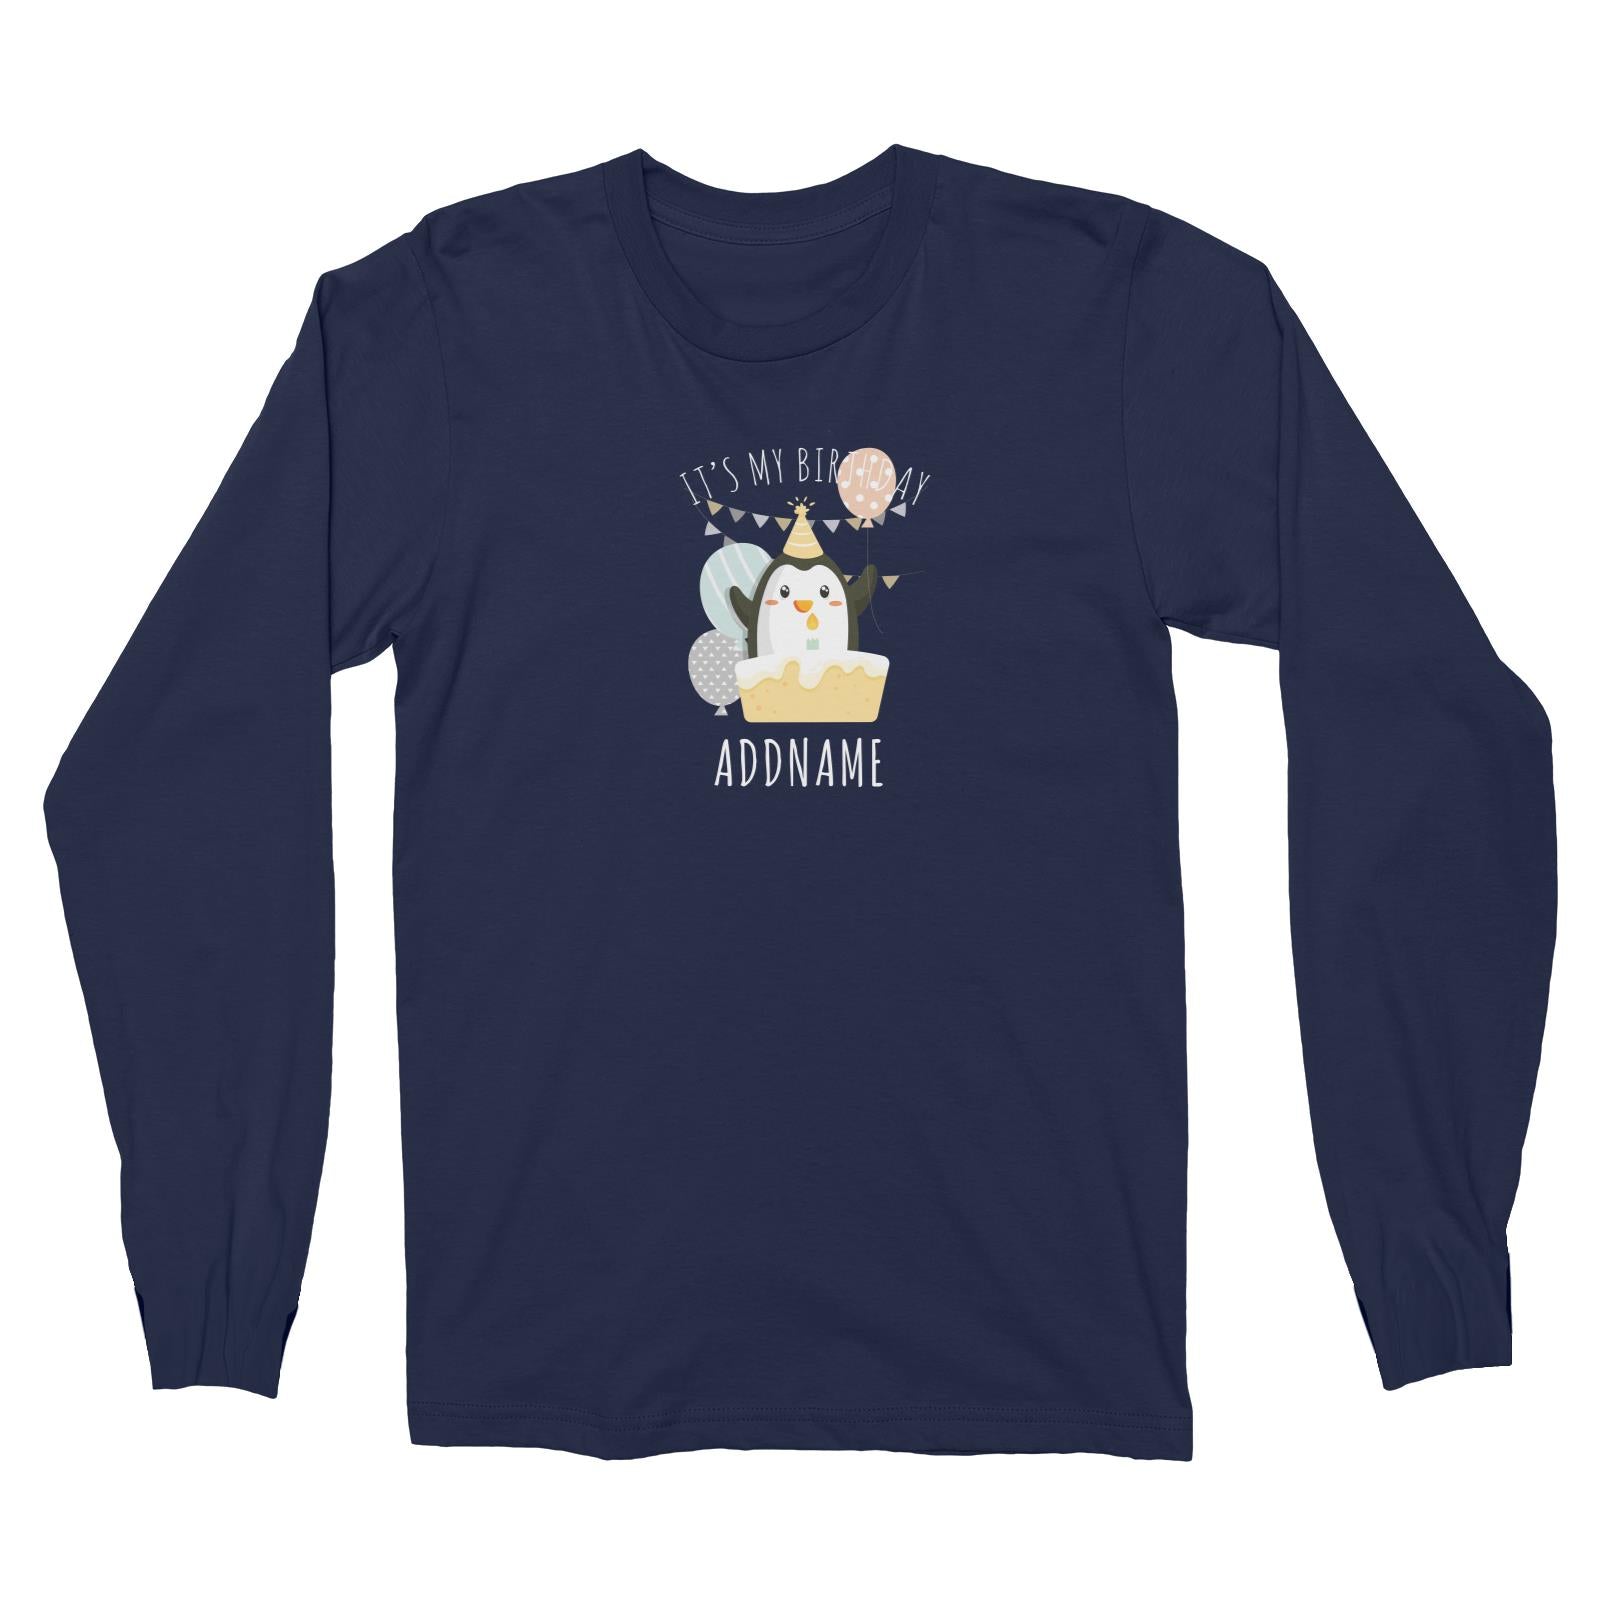 Birthday Cute Penguin And Cake It's My Birthday Addname Long Sleeve Unisex T-Shirt